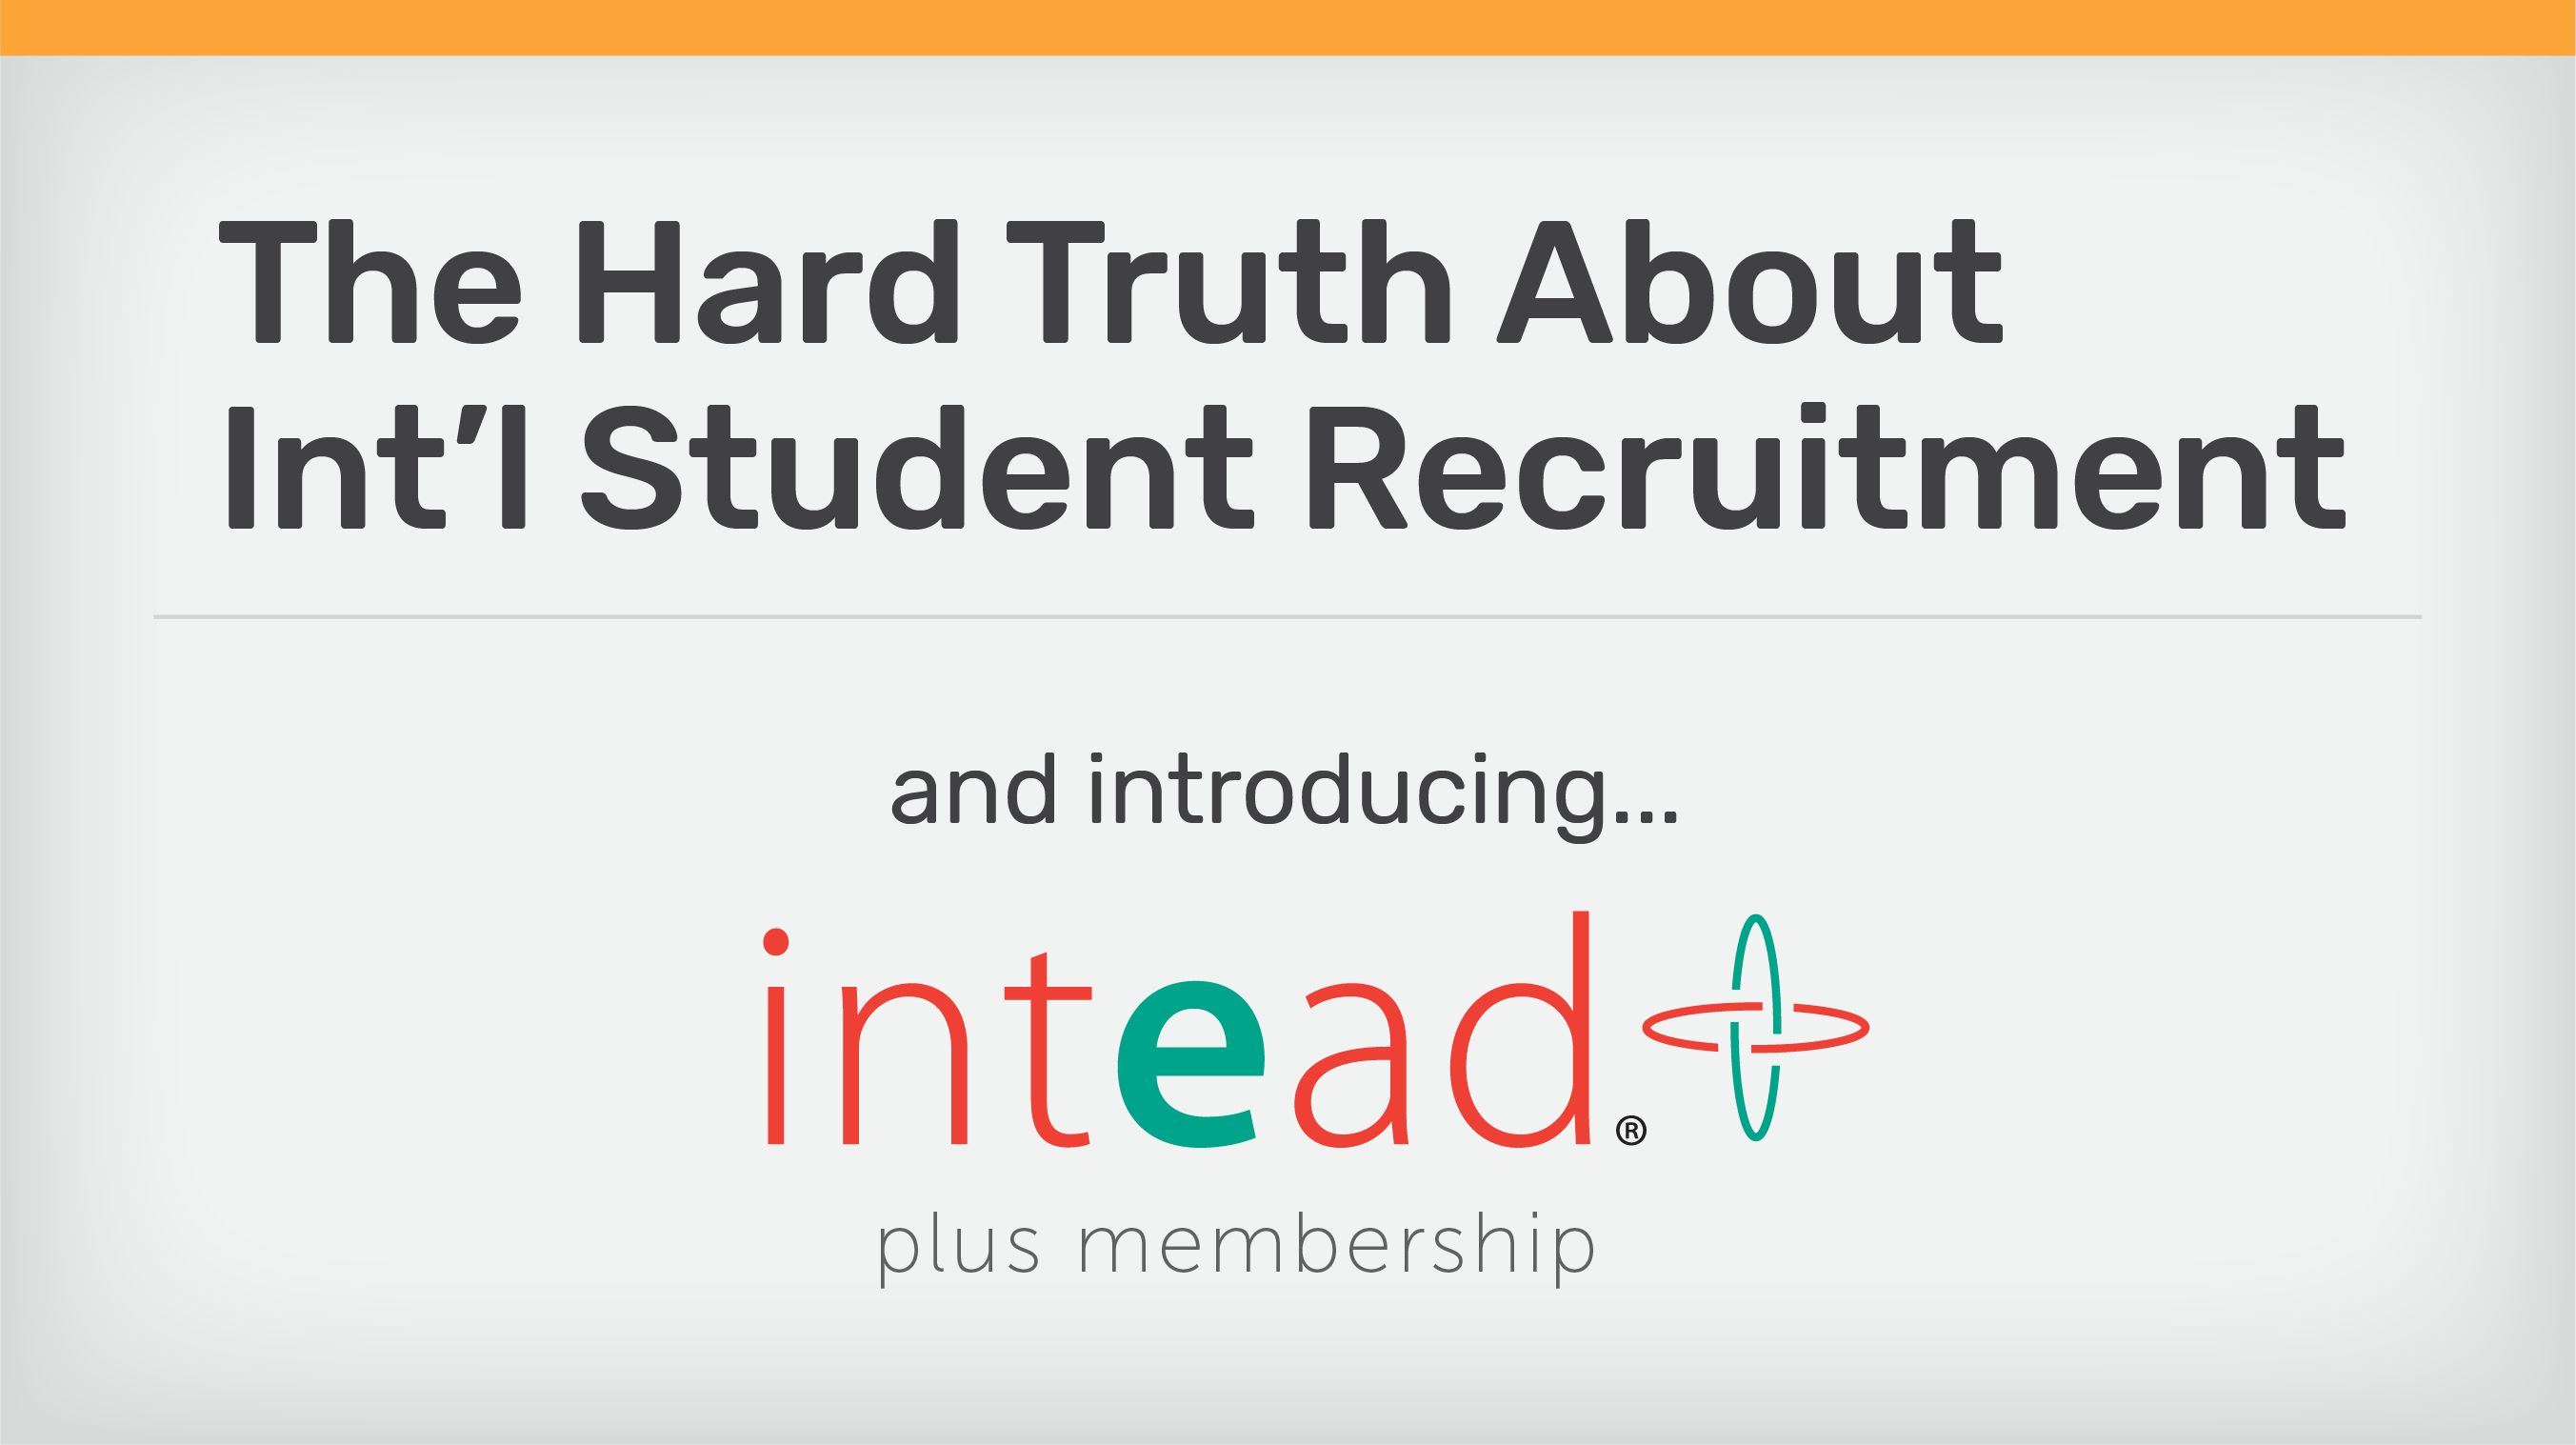 The Hard Truth About Int'l Student Recruitment & Introducing Intead Plus